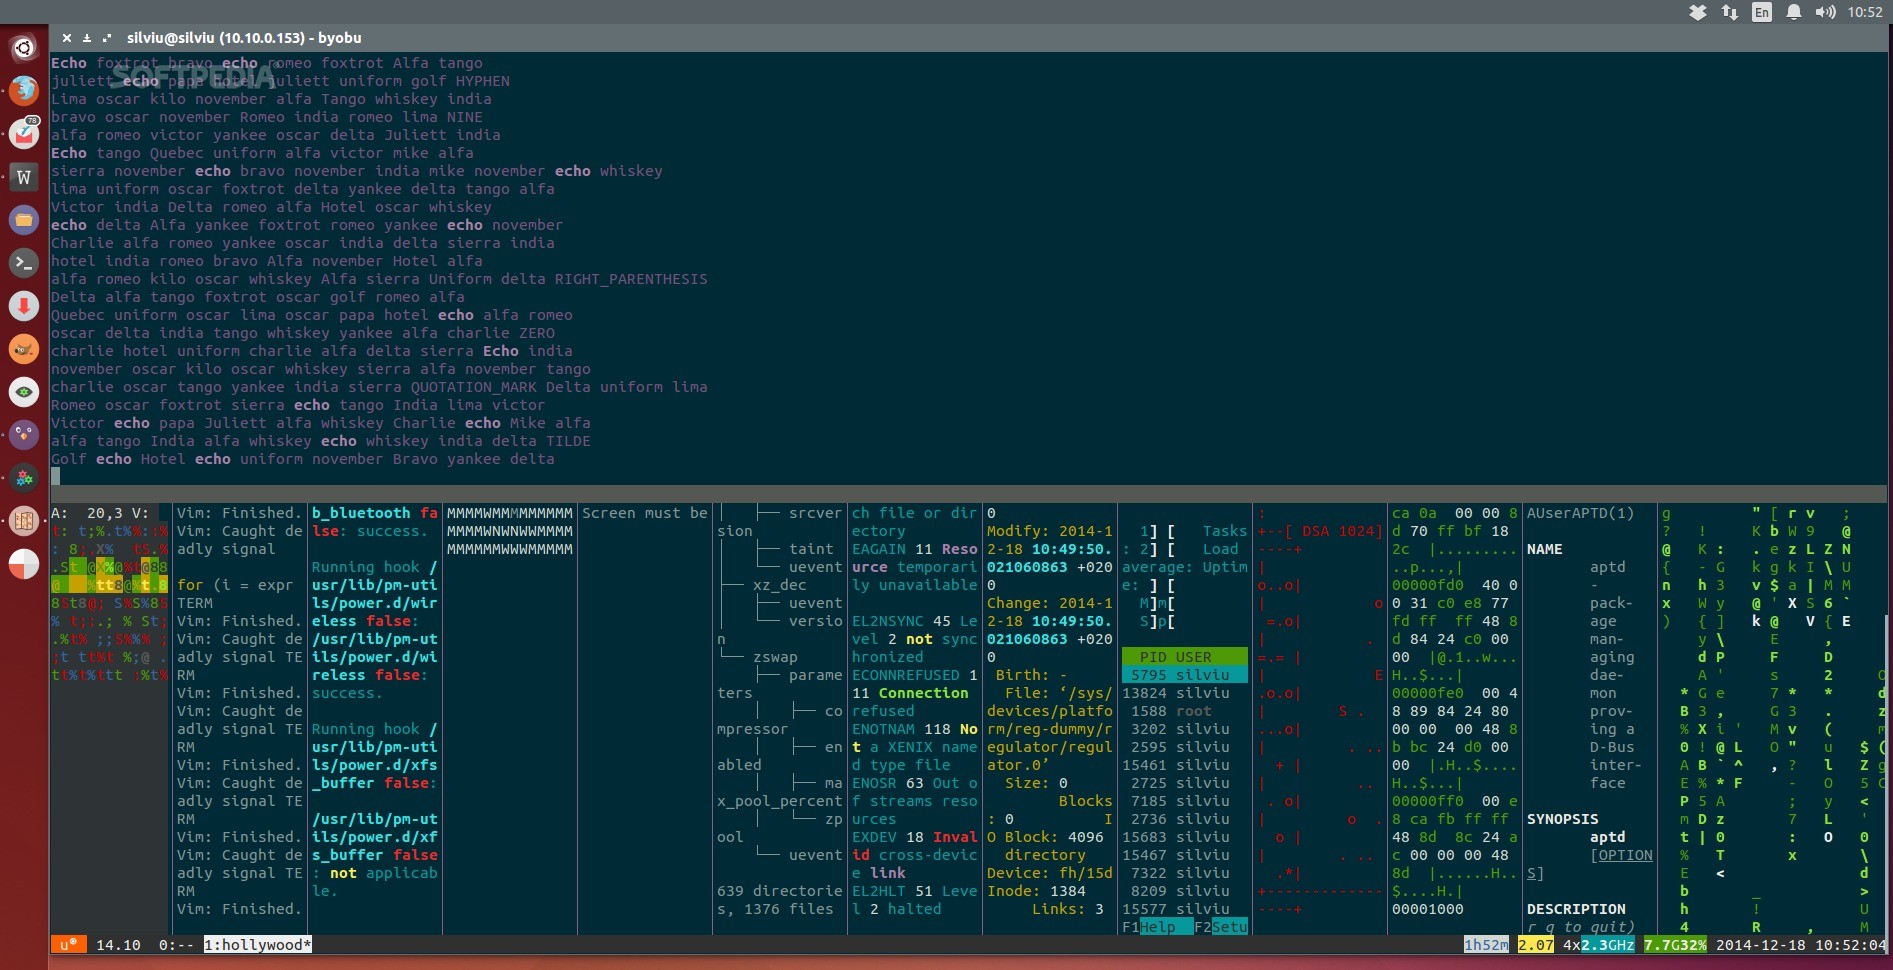 Impress Your Friends with This Fake Hollywood Hacker Terminal